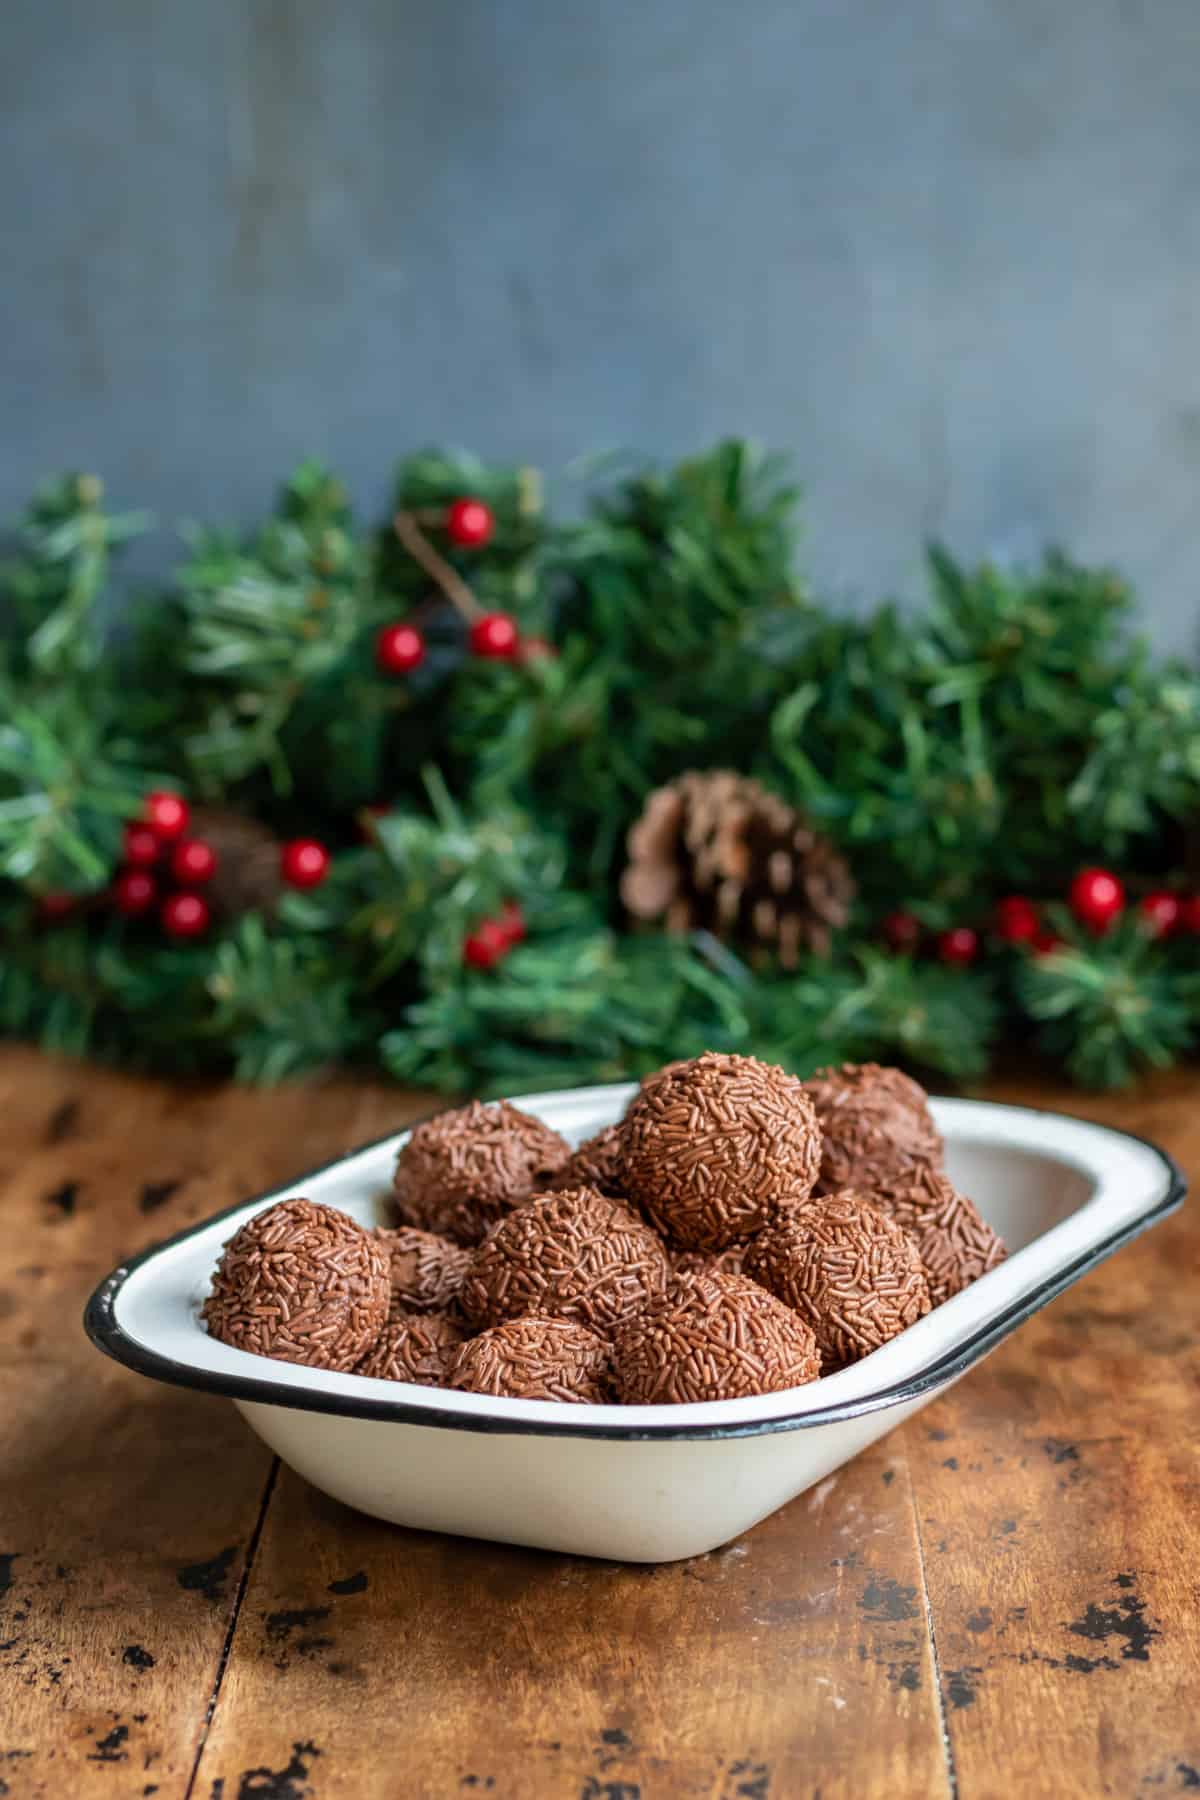 Dish of rumkugeln rum balls on a wooden table in front of a Christmas pine garland.